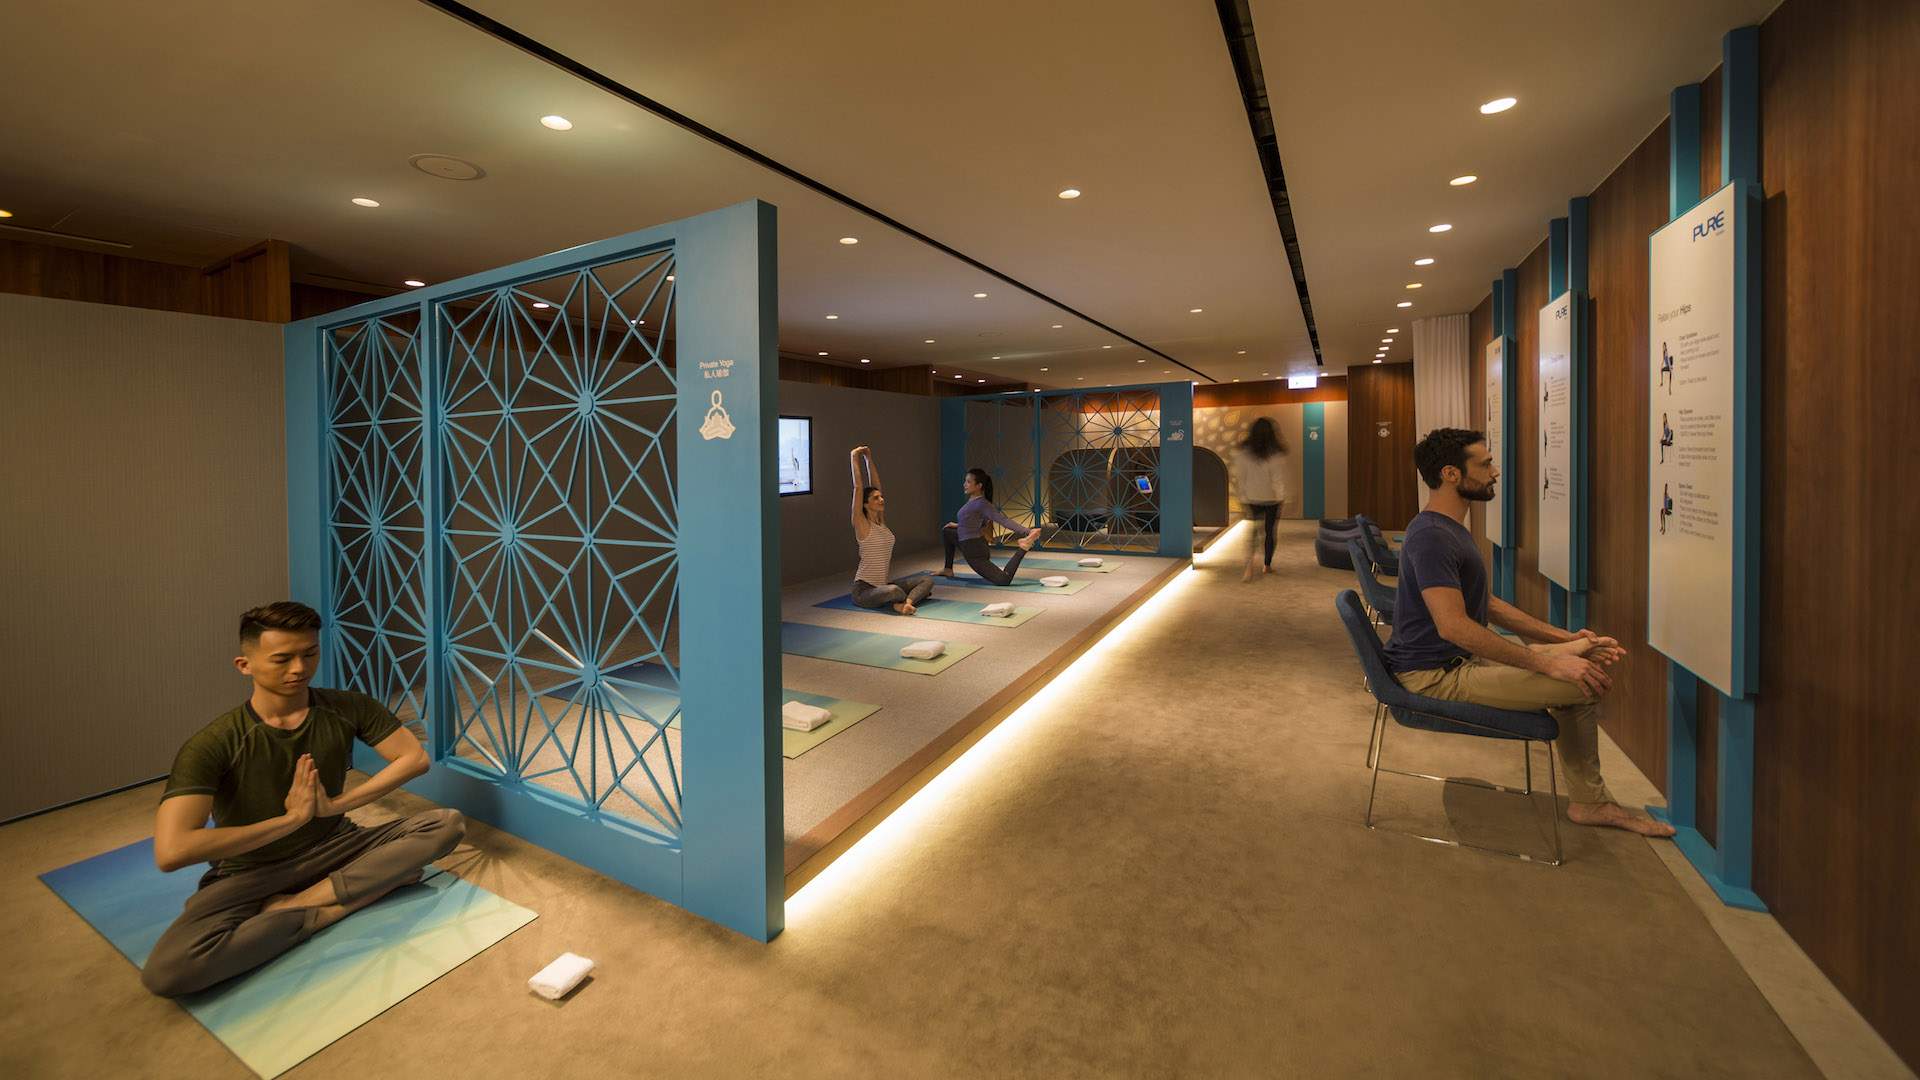 Cathay Pacific Introduces a Pre-Flight Wellness Area for Travellers